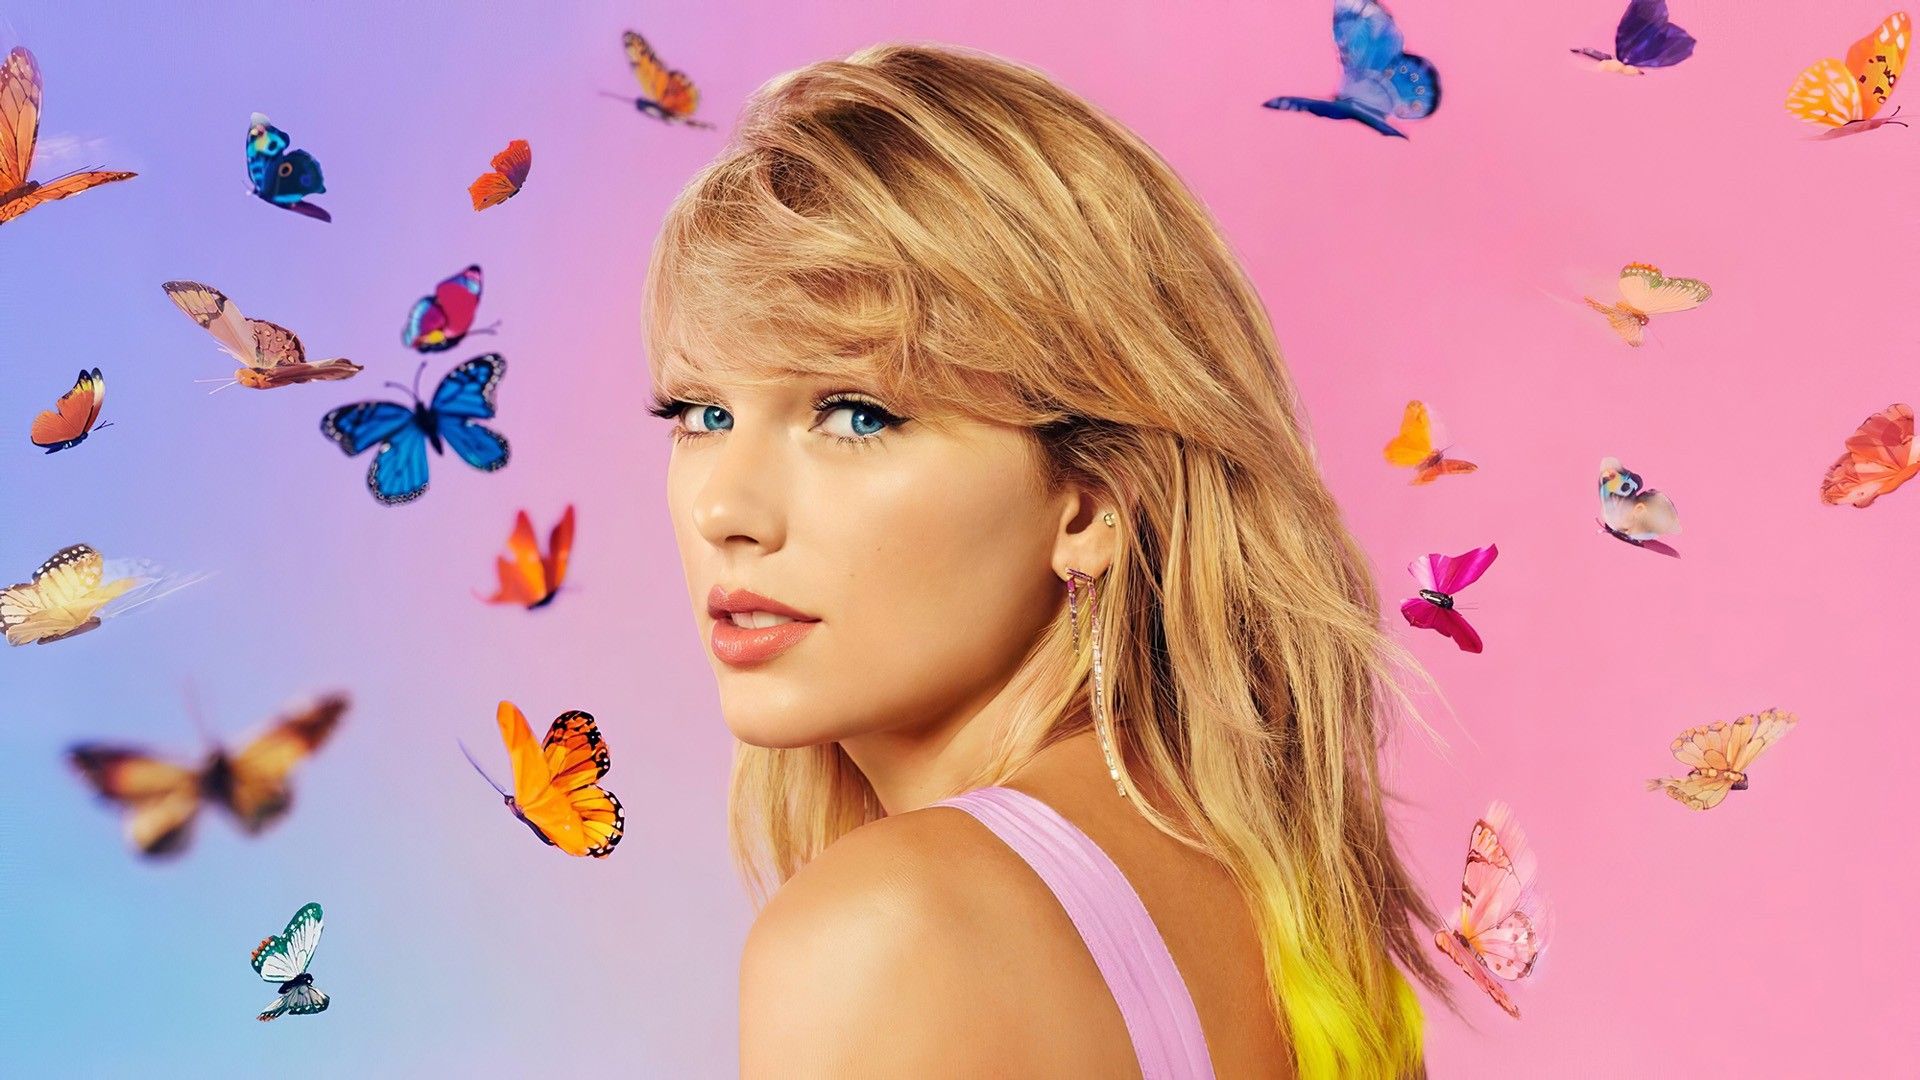 Taylor Swift With Blue Eyes And Butterflies On Background HD Taylor Swift Wallpaper